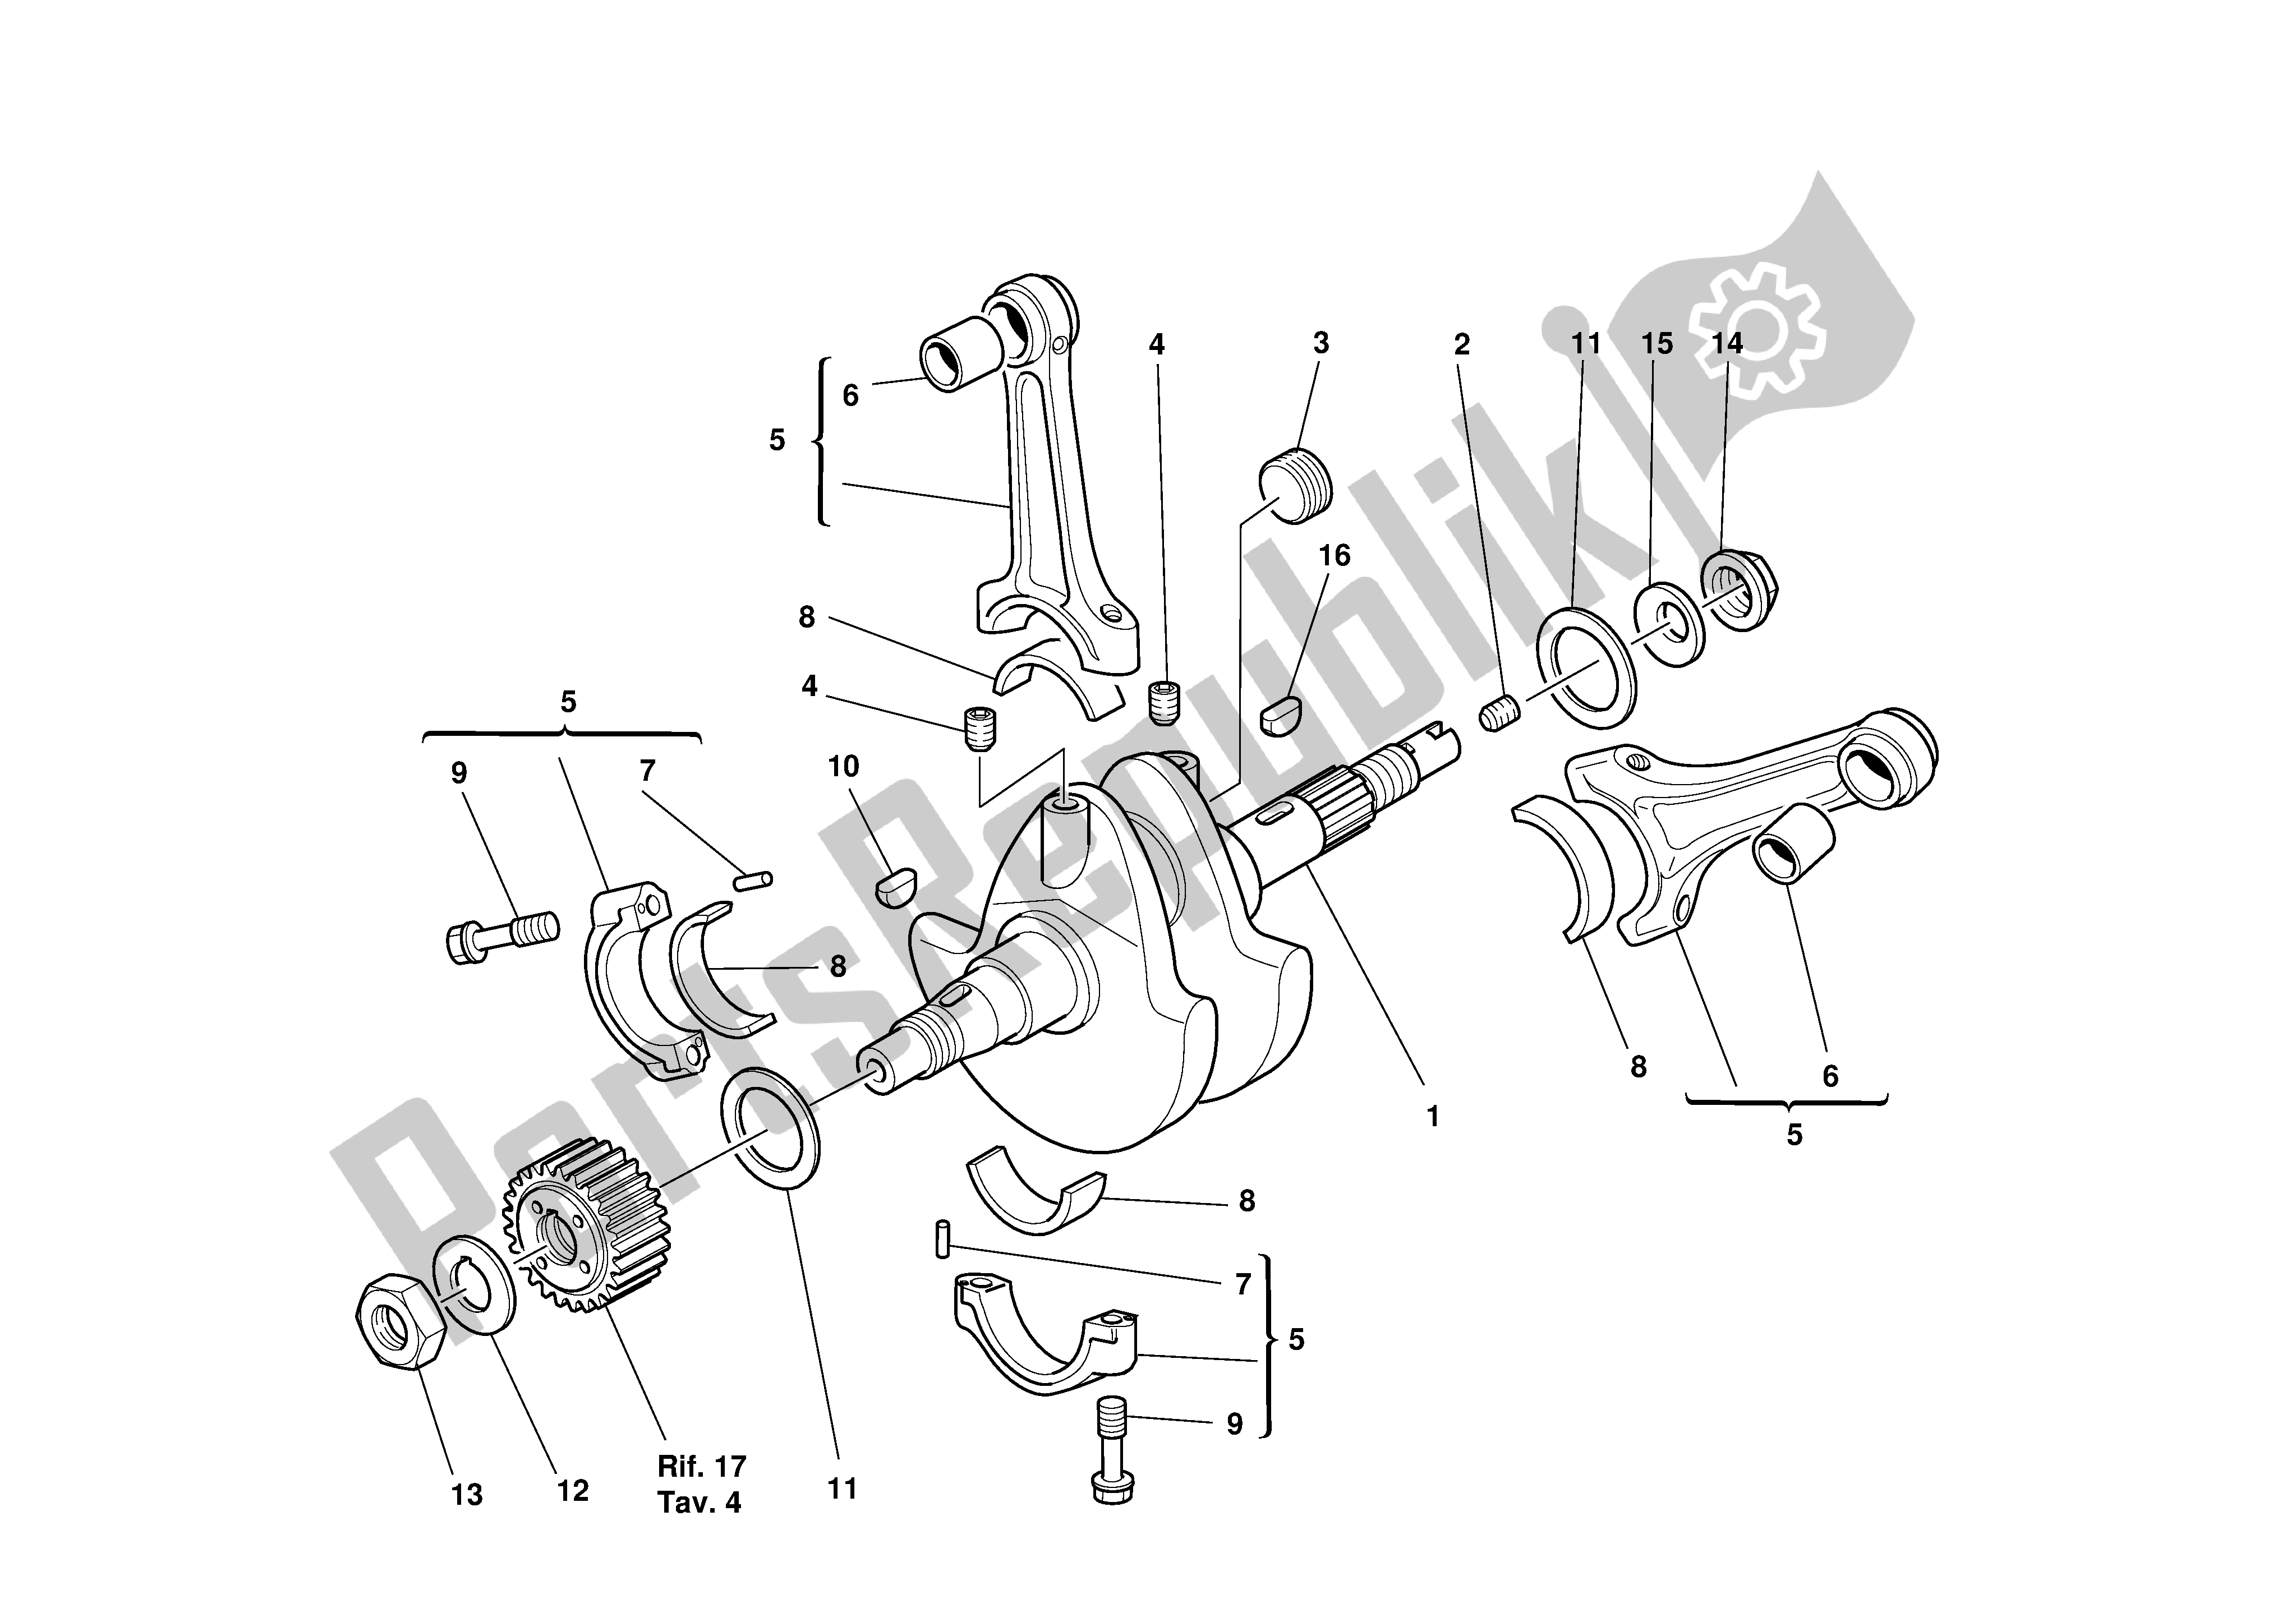 All parts for the Crankshaft of the Ducati 748 2001